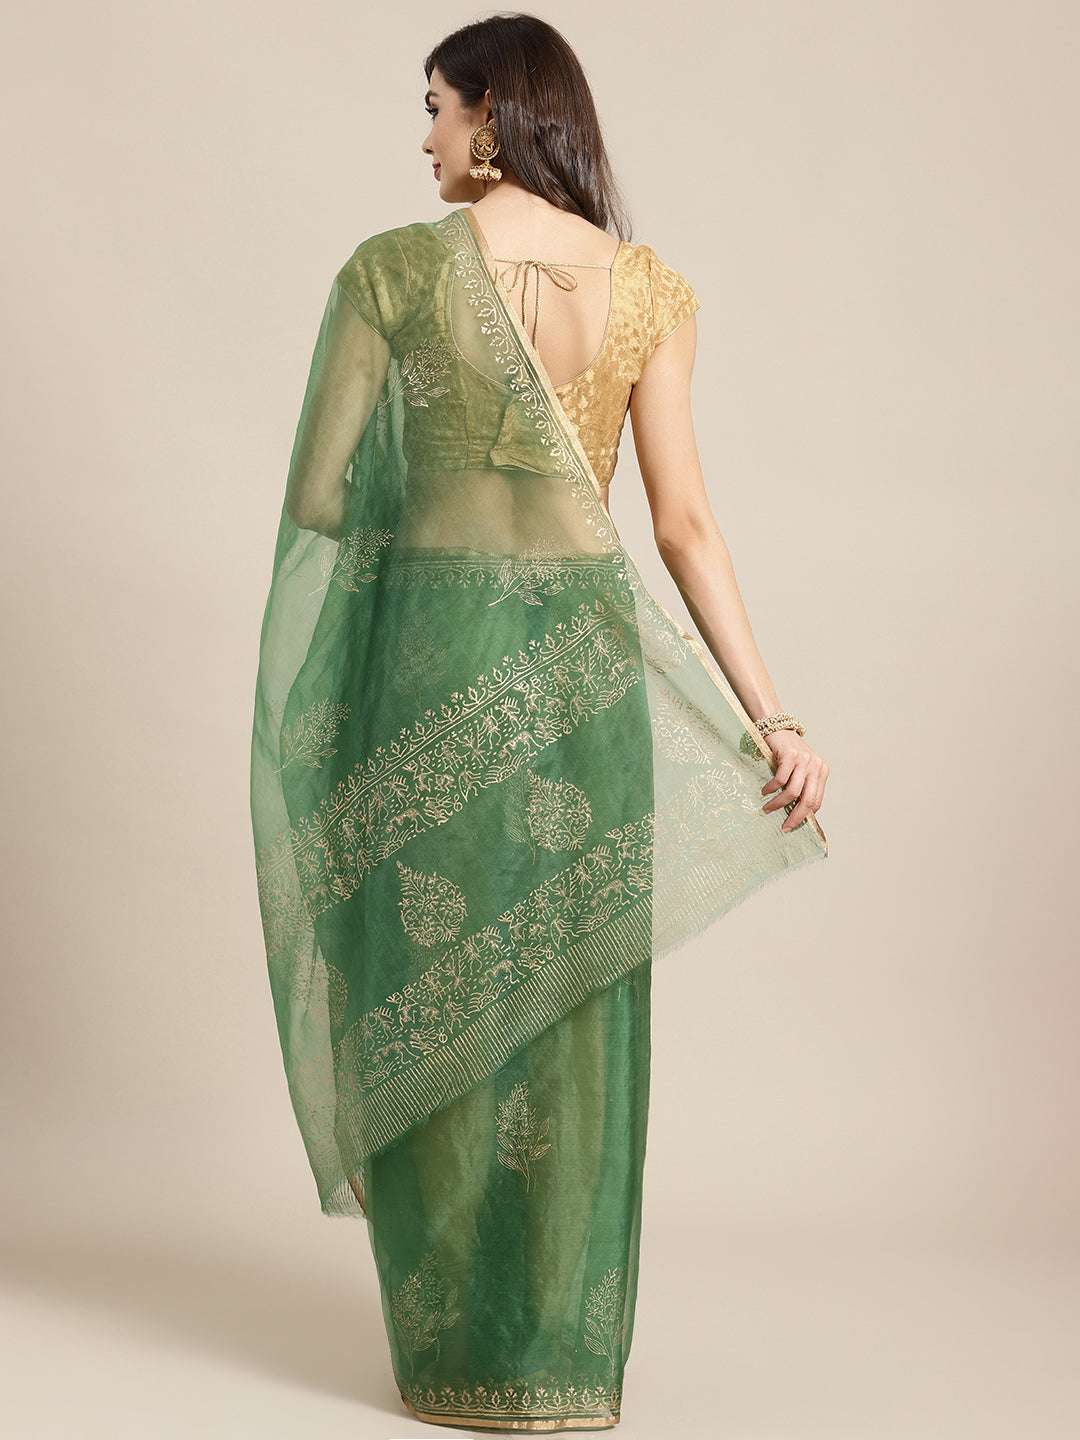 Green and , Kalakari India Organza Hand Block Print Saree with blouse BHKPSA0147-Saree-Kalakari India-BHKPSA0147-Geographical Indication, Hand Crafted, Hand Painted, Heritage Prints, Natural Dyes, Organza, Red, Sarees, Sustainable Fabrics, Woven, Yellow-[Linen,Ethnic,wear,Fashionista,Handloom,Handicraft,Indigo,blockprint,block,print,Cotton,Chanderi,Blue, latest,classy,party,bollywood,trendy,summer,style,traditional,formal,elegant,unique,style,hand,block,print, dabu,booti,gift,present,glamorous,a